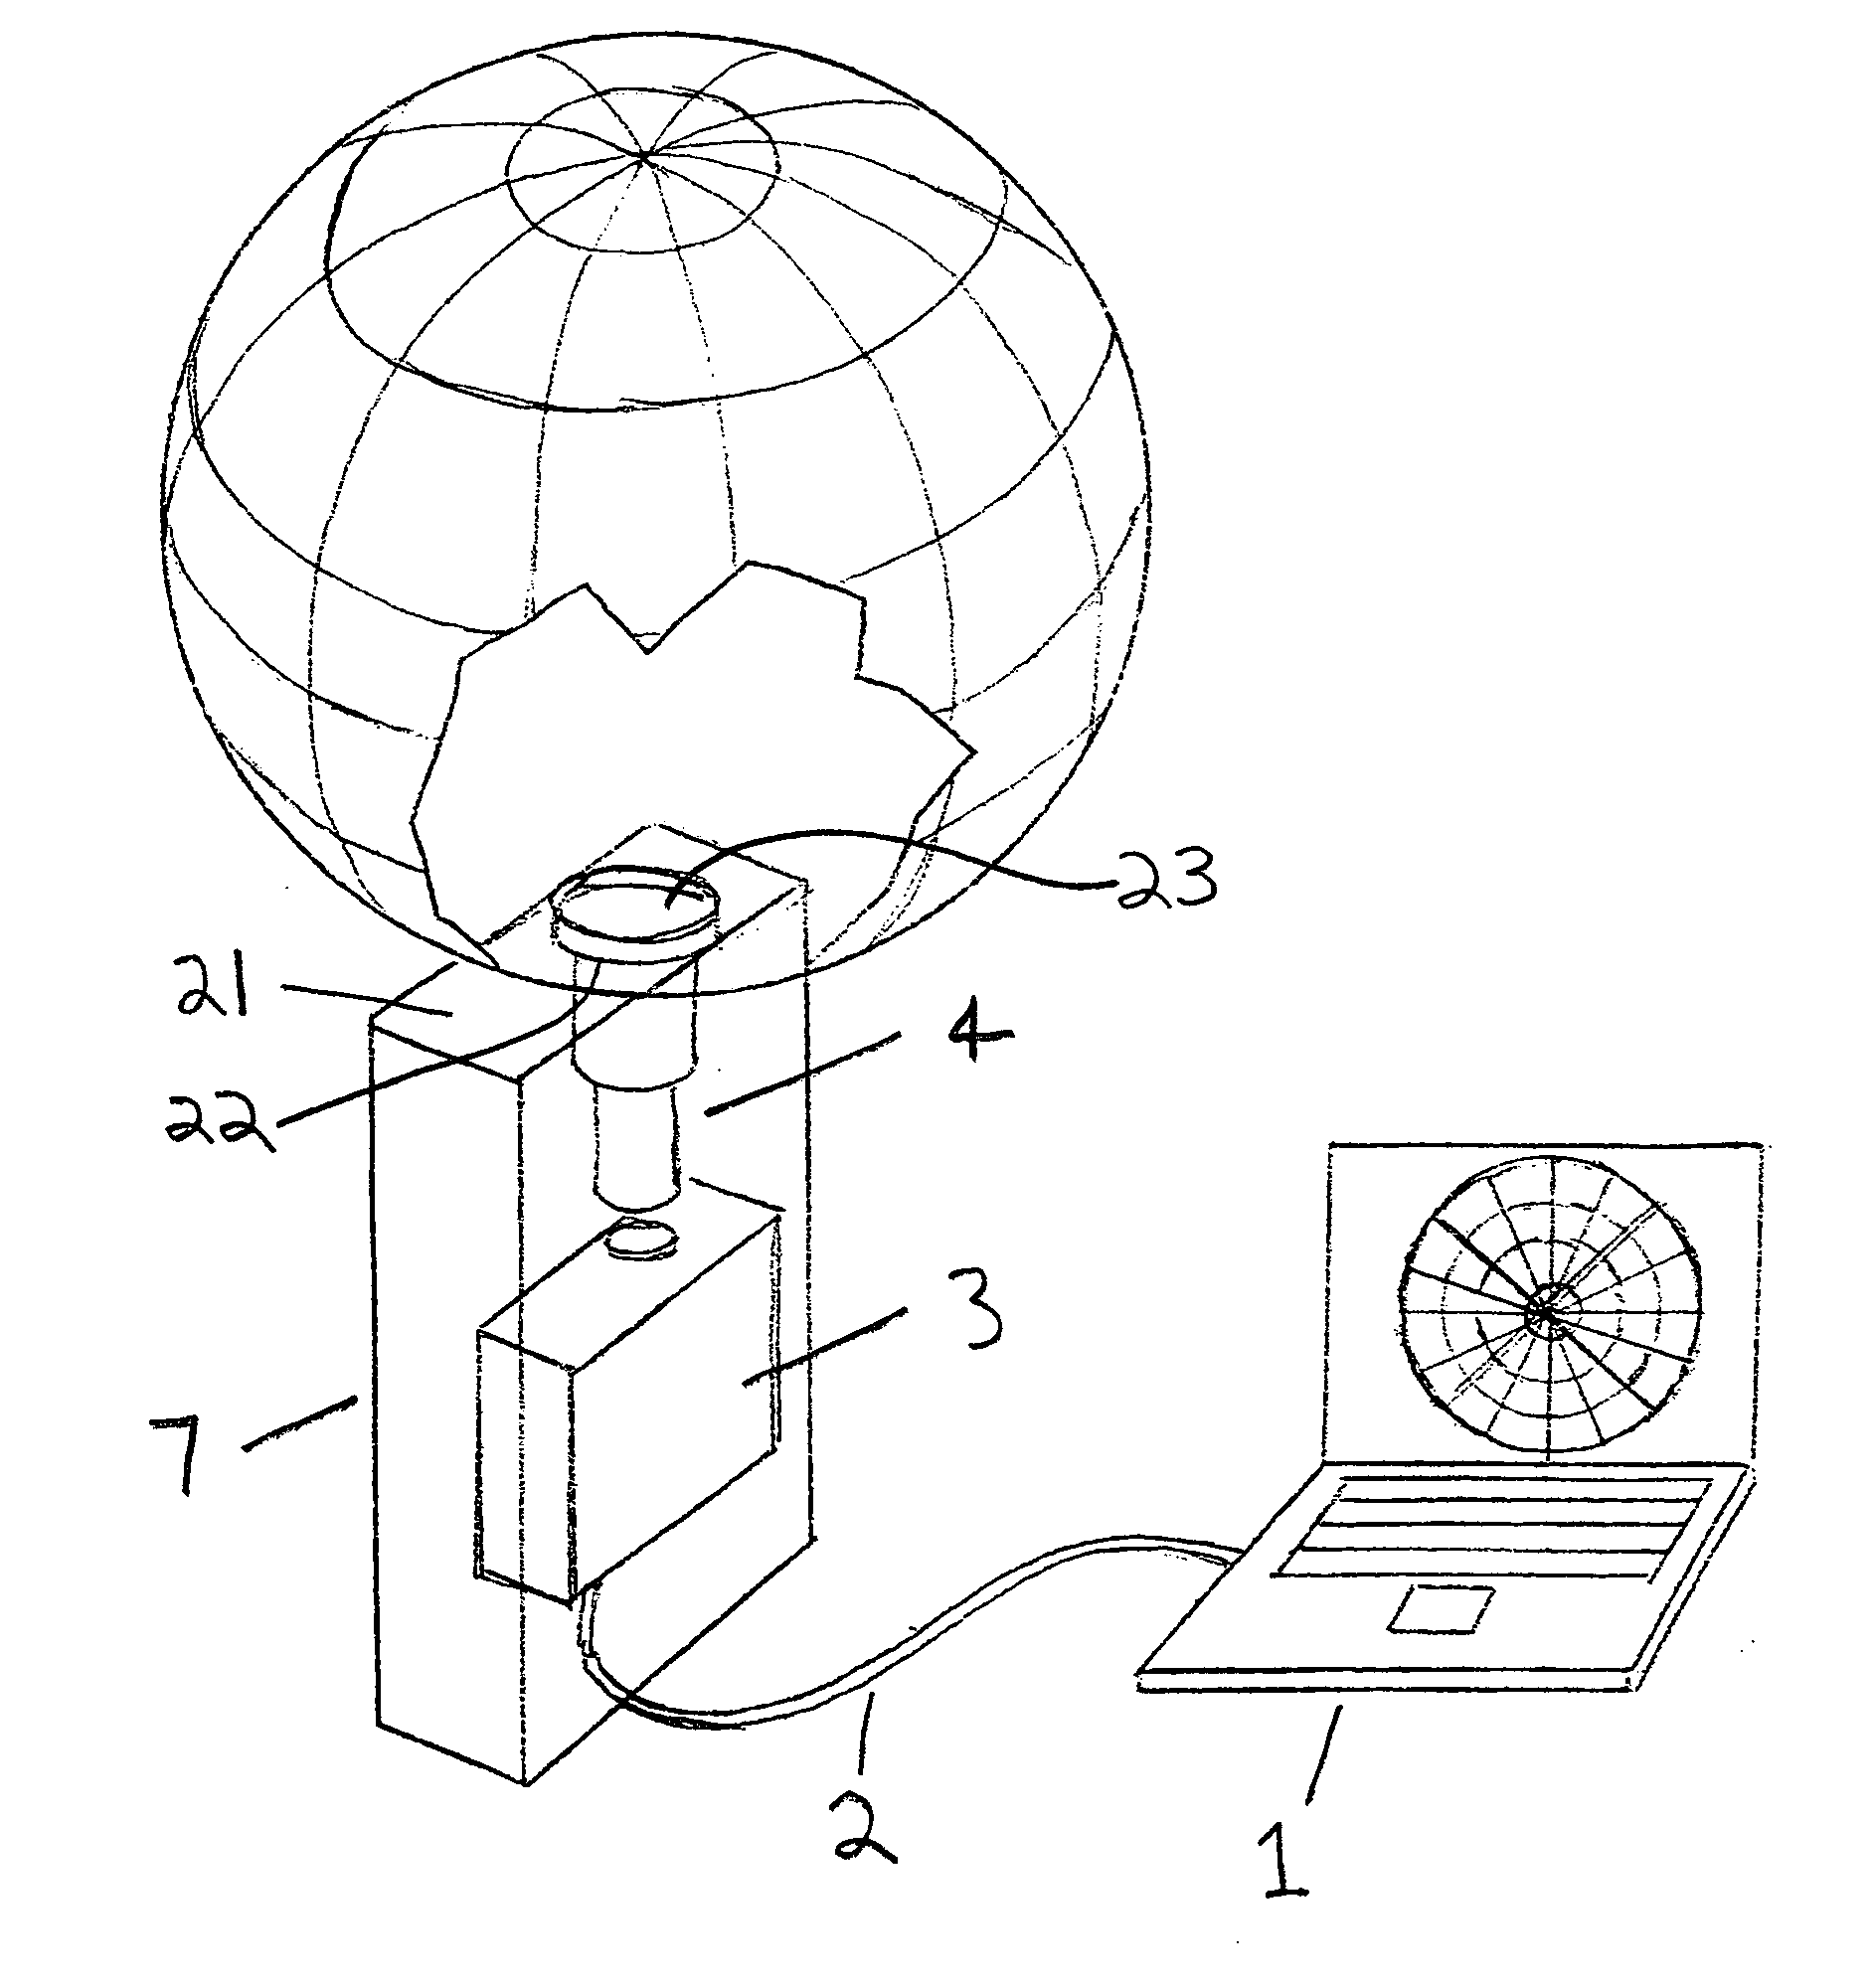 Display system having a three-dimensional convex display surface